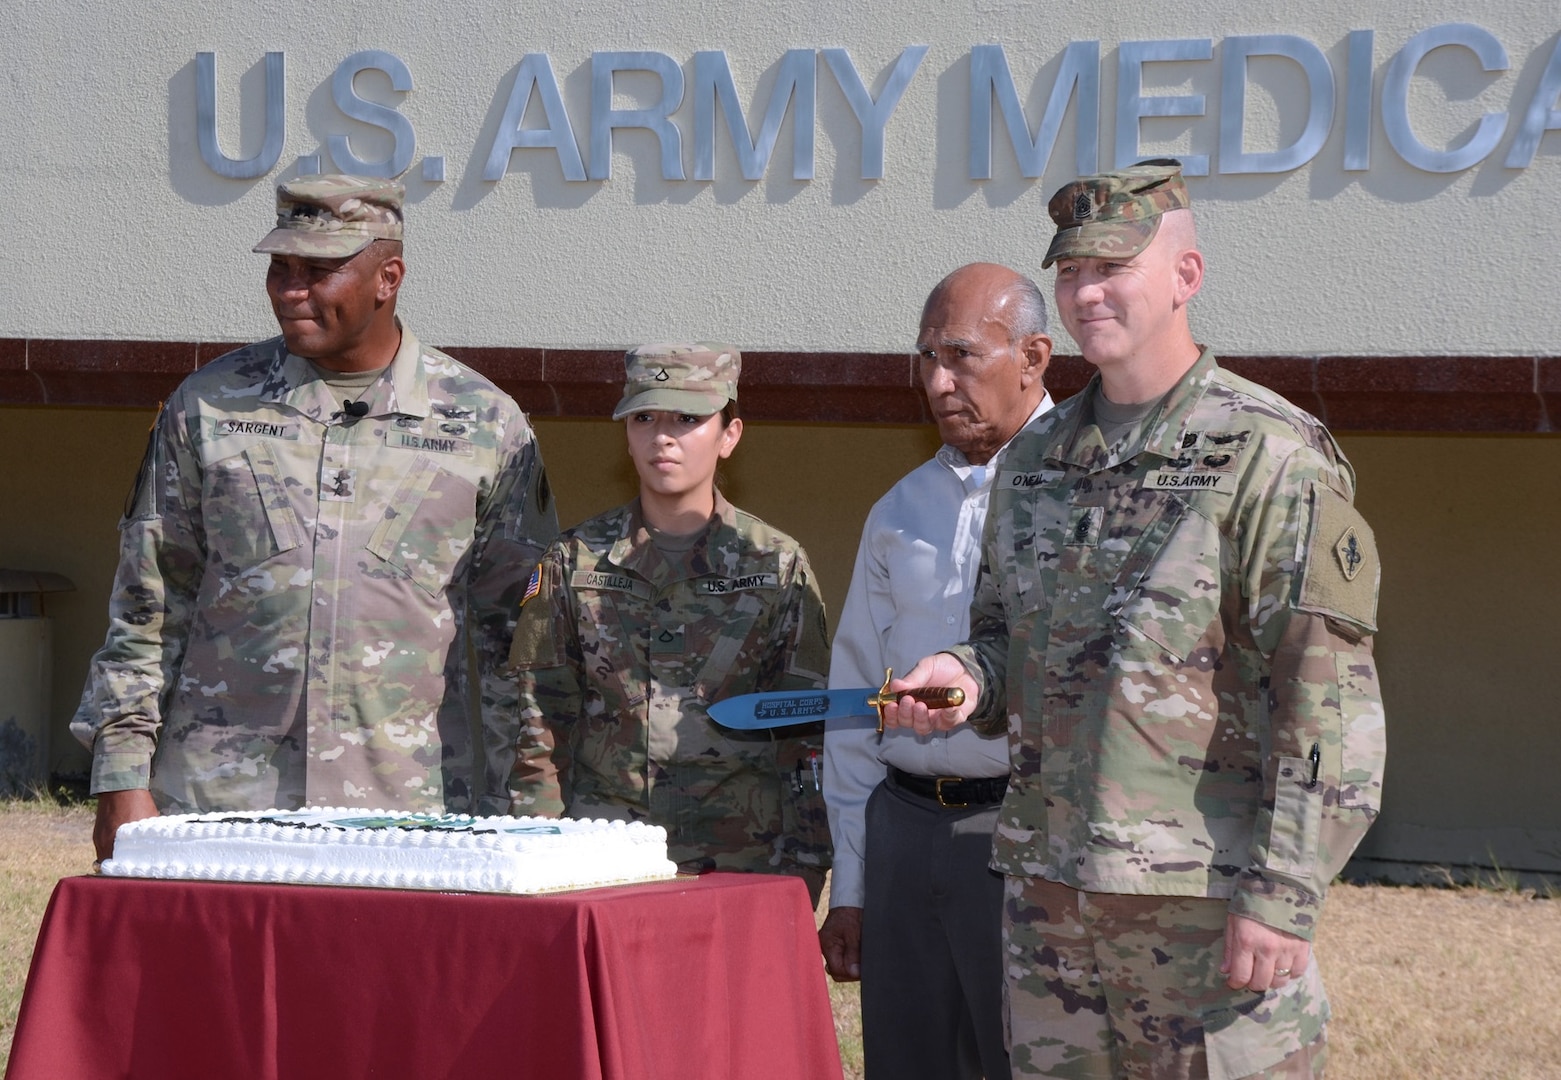 To celebrate the redesignation to U.S. Army Medical Center of Excellence, or MEDCoE, the command also conducted a cake-cutting ceremony at Joint Base San Antonio-Fort Sam Houston Sept. 16. Assisting Maj. Gen. Patrick D. Sargent and Command Sgt. Maj. William "Buck" O'Neal were the most junior and most senior personnel in the command, as is a time-honored military tradition. Instead of a sabre, MEDCoE cut their ceremonial cake with a replica of the Hospital Corps knife, which was established in 1887. Pictured (from left) are Sargent, Pvt. 1st Class Briana Castilleja Hernandez, Jesus Serbantez, and O’Neal.